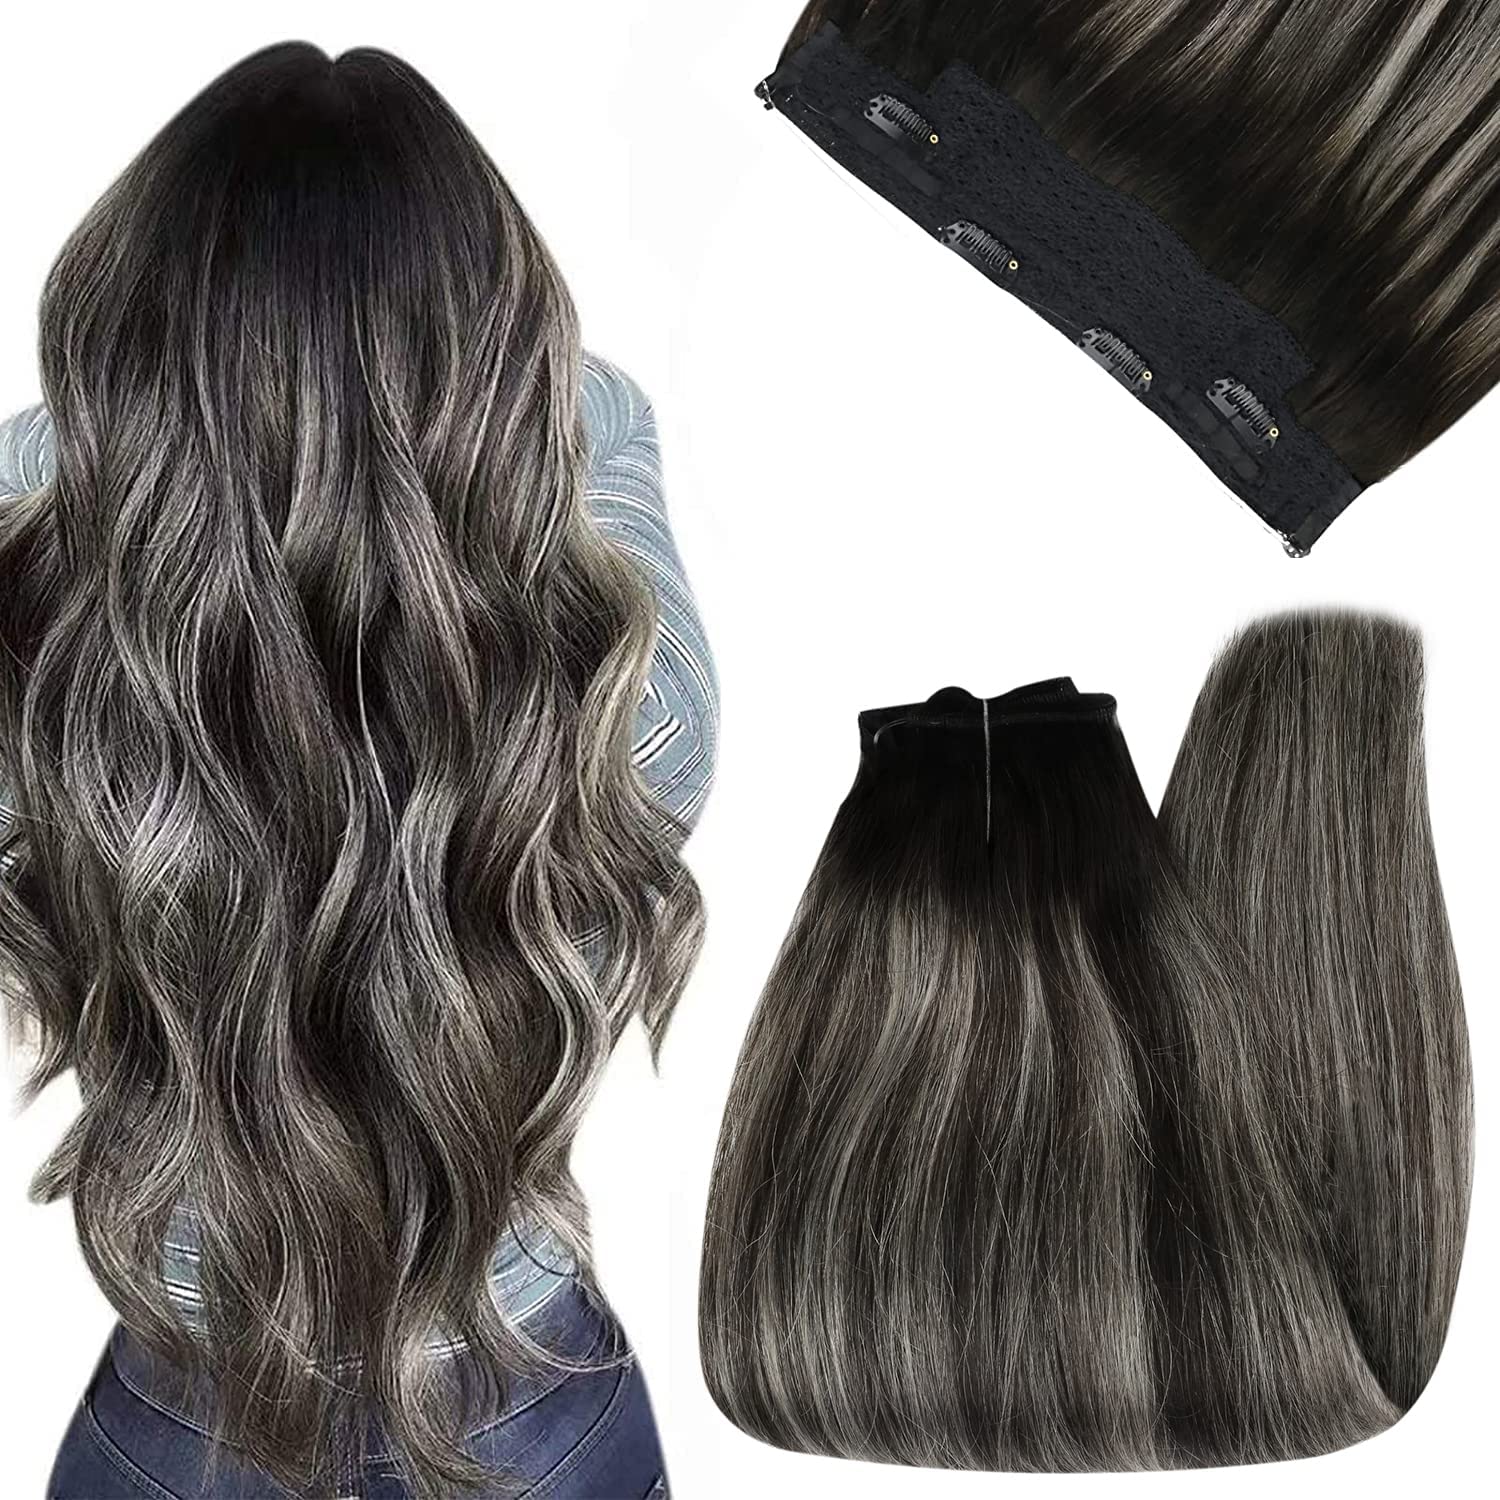 Wire Hair Extensions Human Hair Balayage Black Mixed Silver #1B/Silver/1B |Youngsee